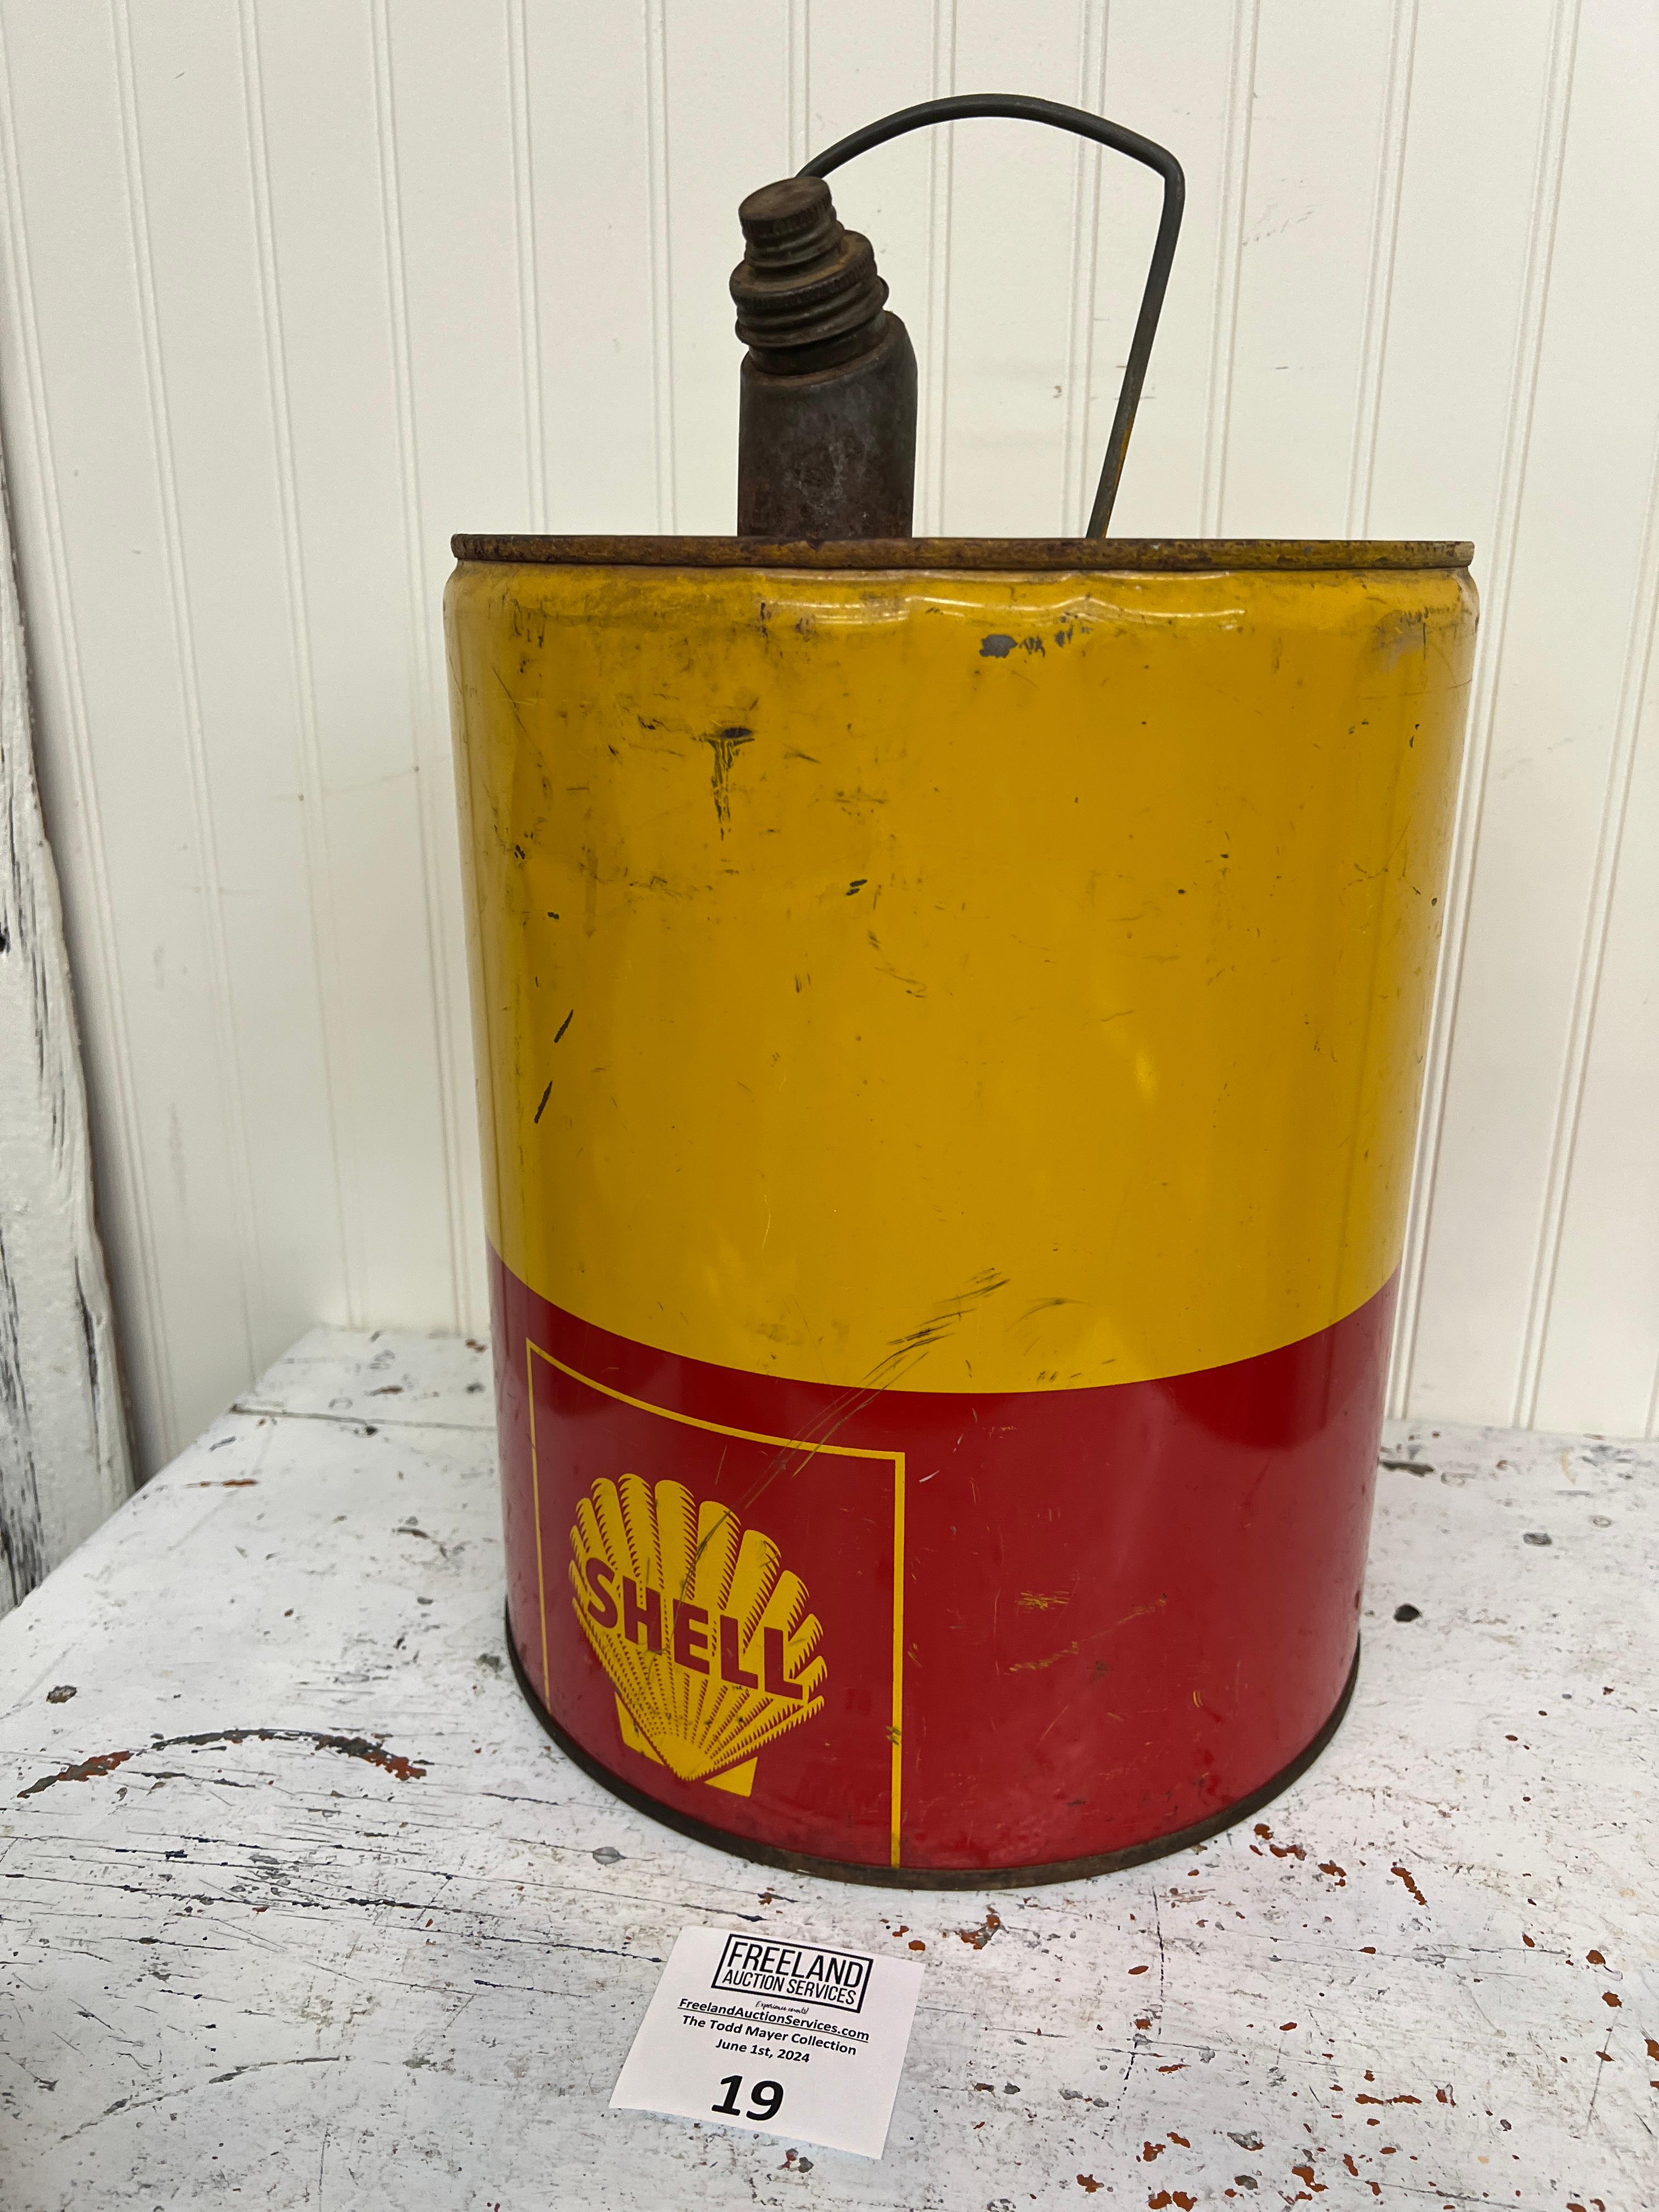 Shell Oil Company 5 gallon Advertising gas can